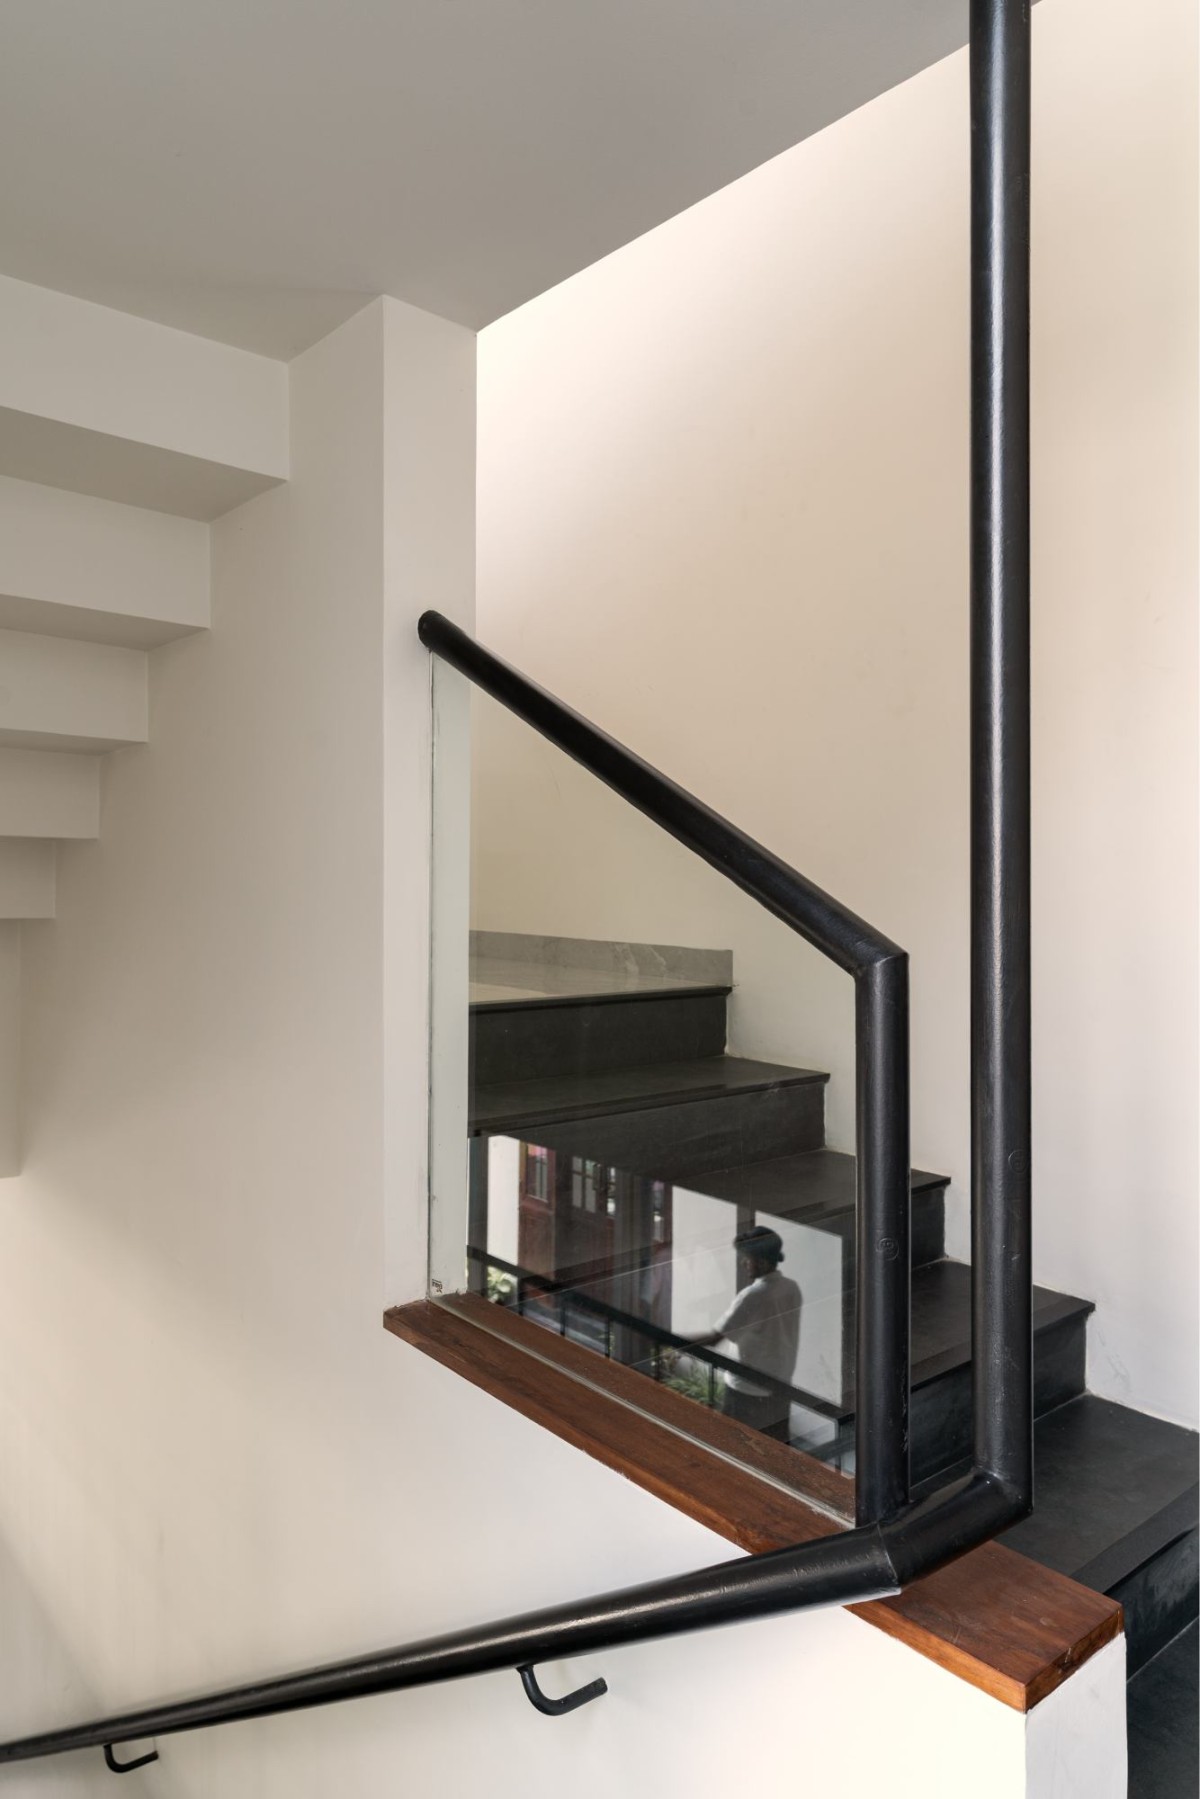 Staircase of Athira-Paras Residence by Studio Acis